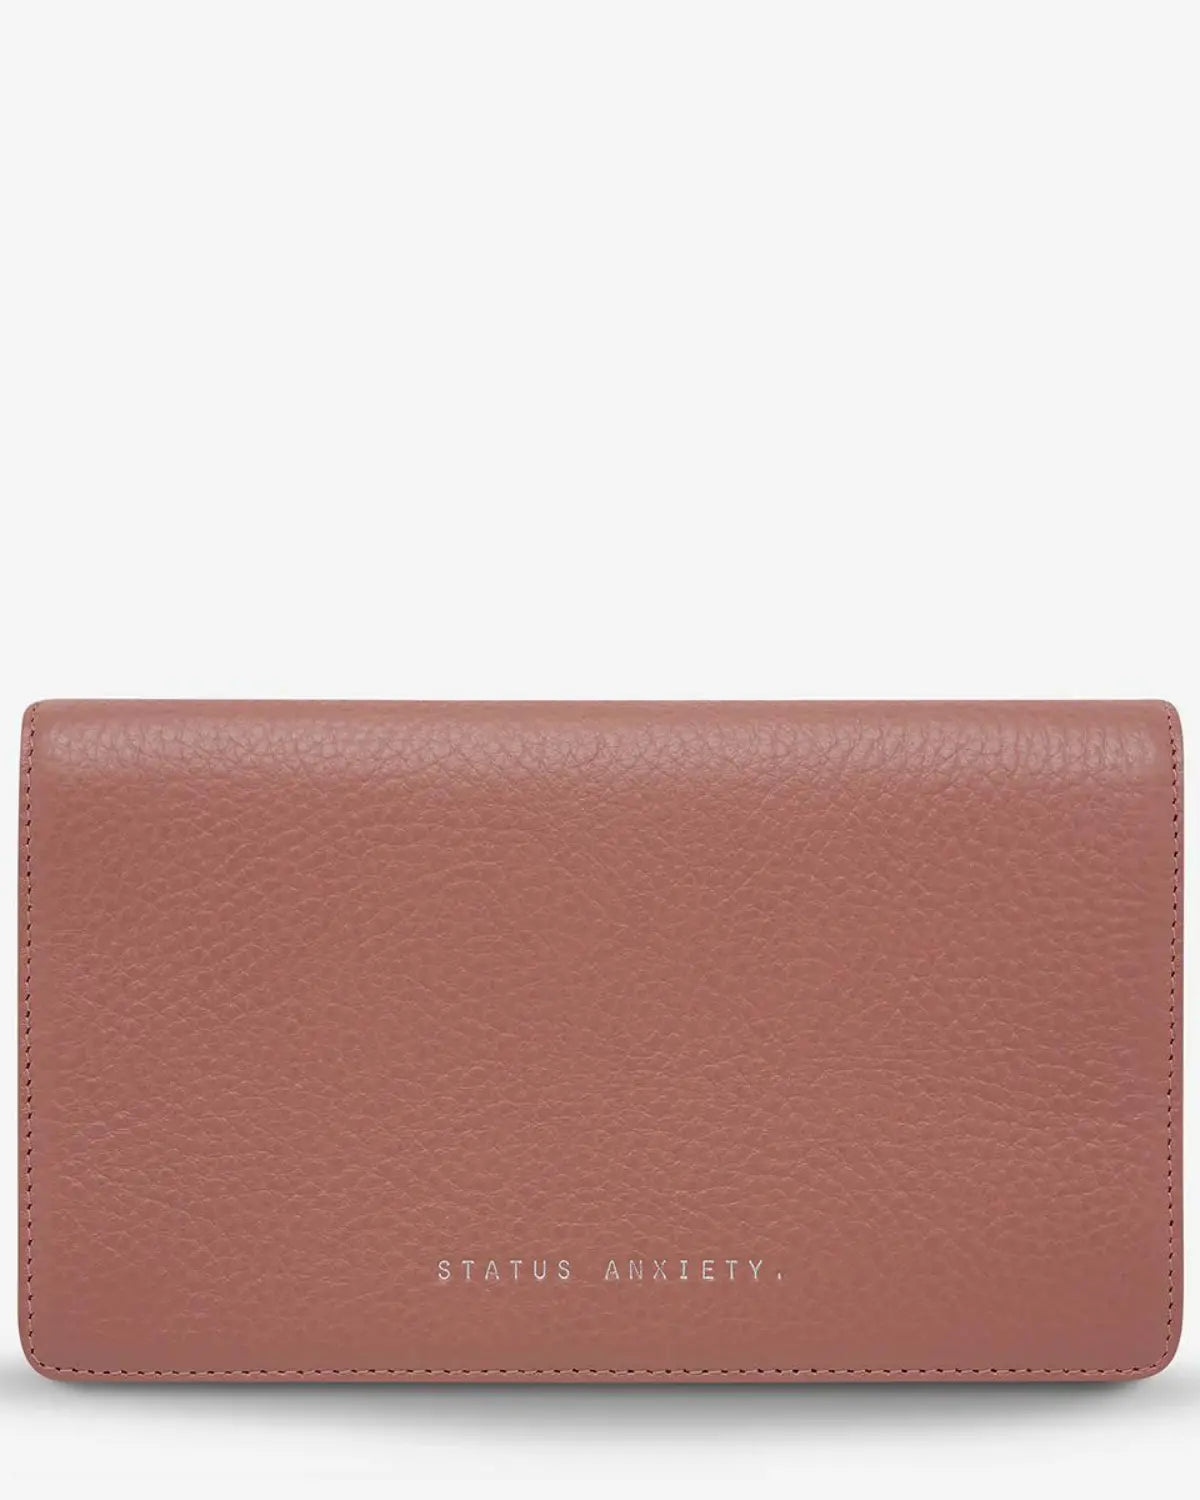 Status Anxiety Living Proof Leather Wallet - Dusty Rose ✨